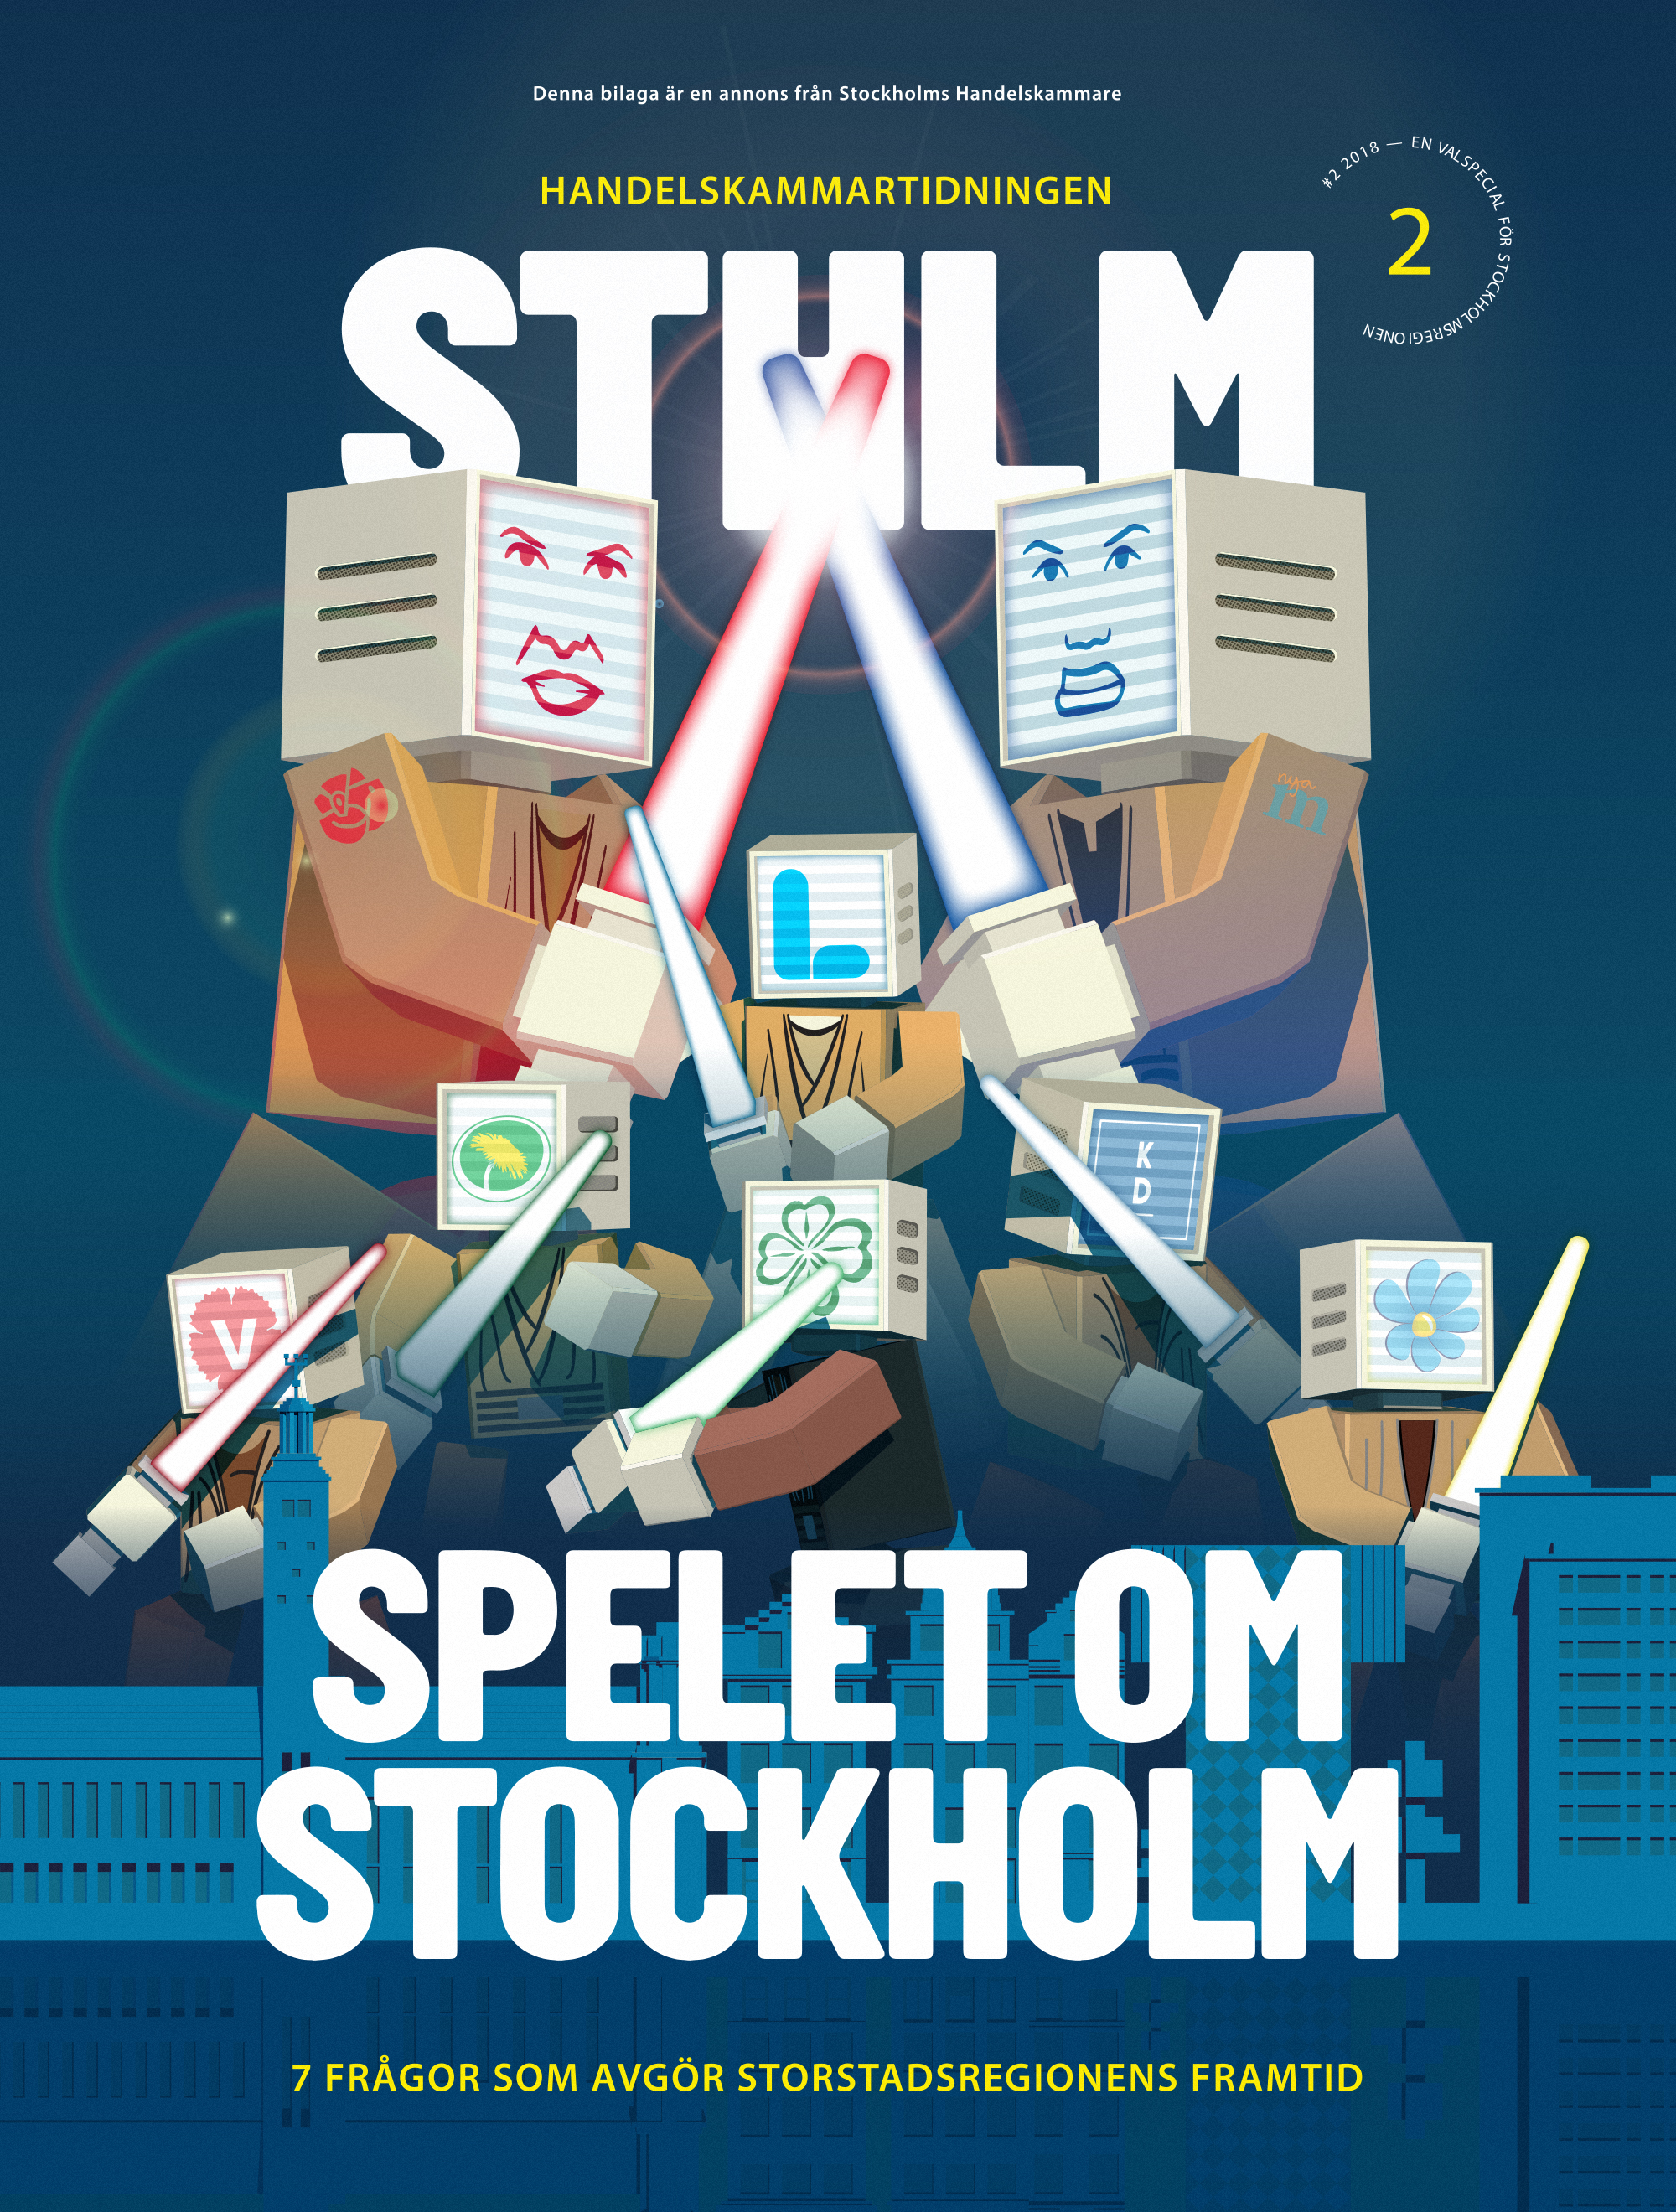 Handelskammaren also called the Chamber made a magazine for the upcoming Swedish election 2018, the magazines concept is about the game of Stockholm with inspiration from the game minecraft and retro games such as Super Mario with look and feel from the S